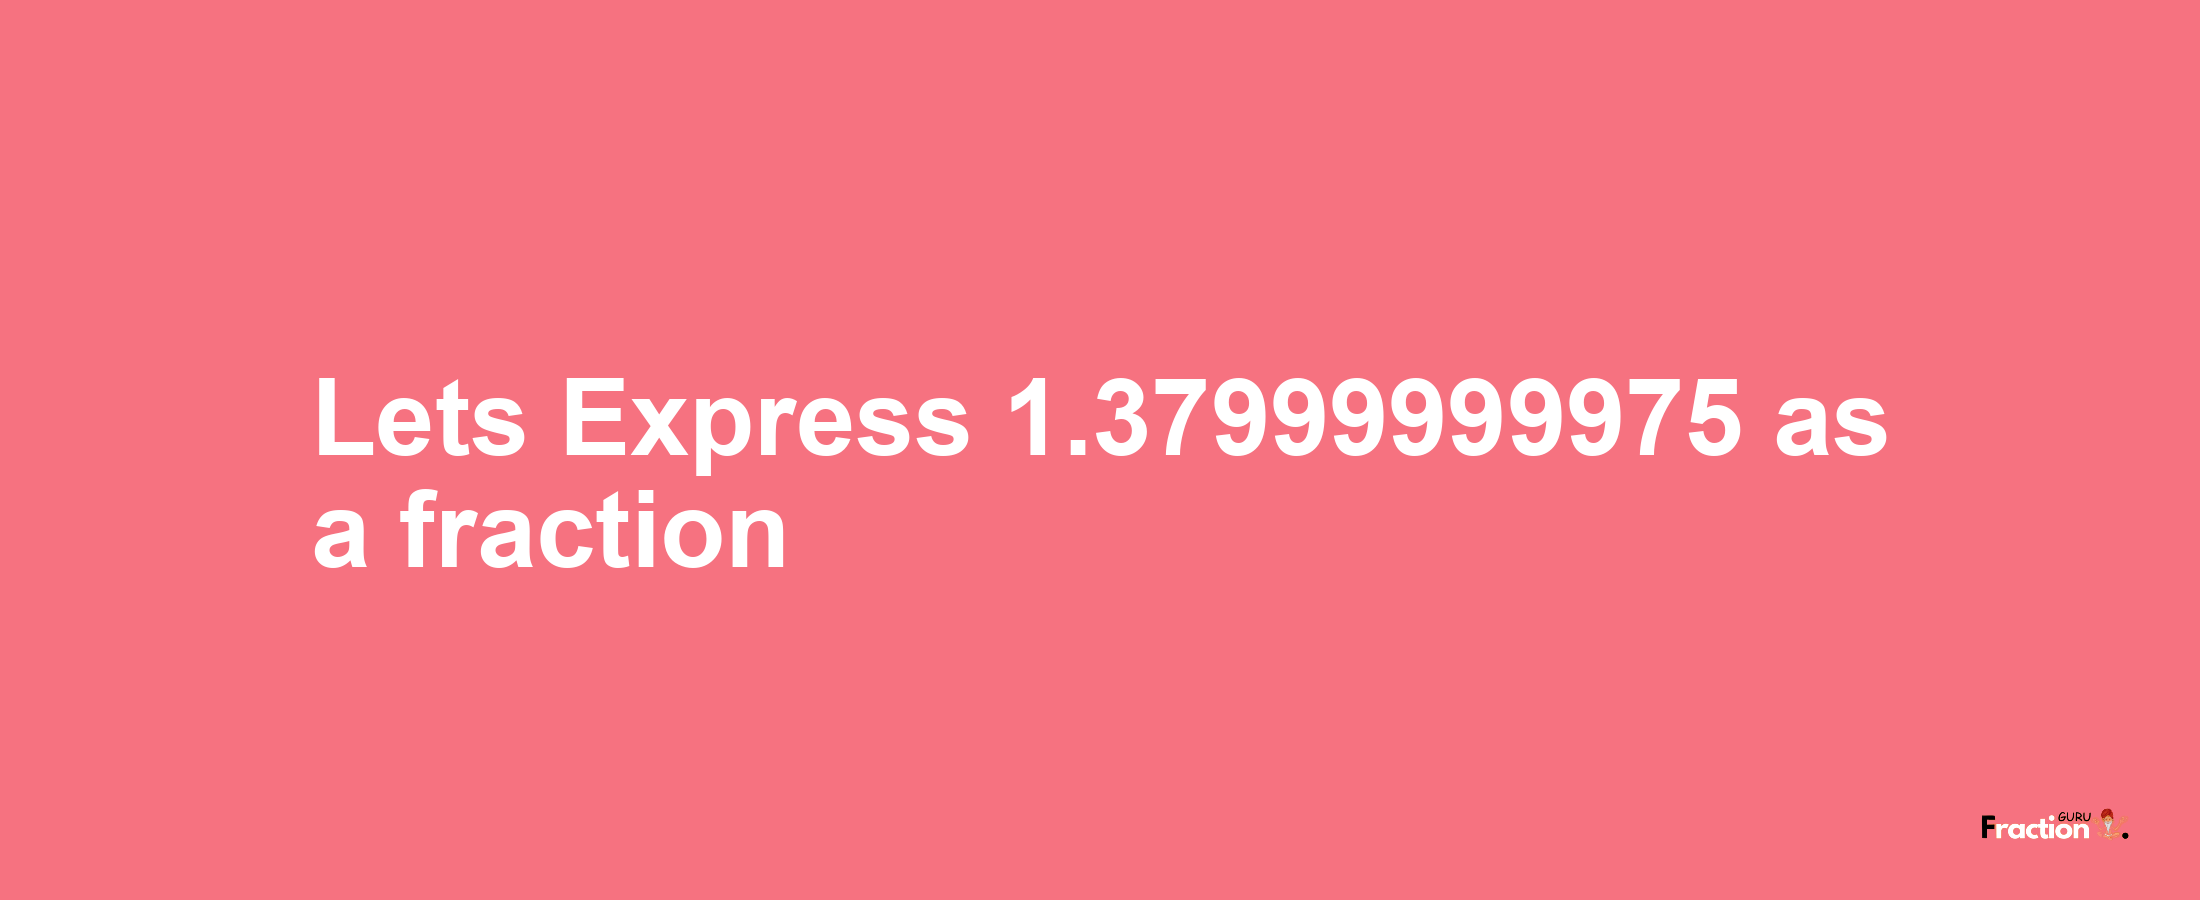 Lets Express 1.37999999975 as afraction